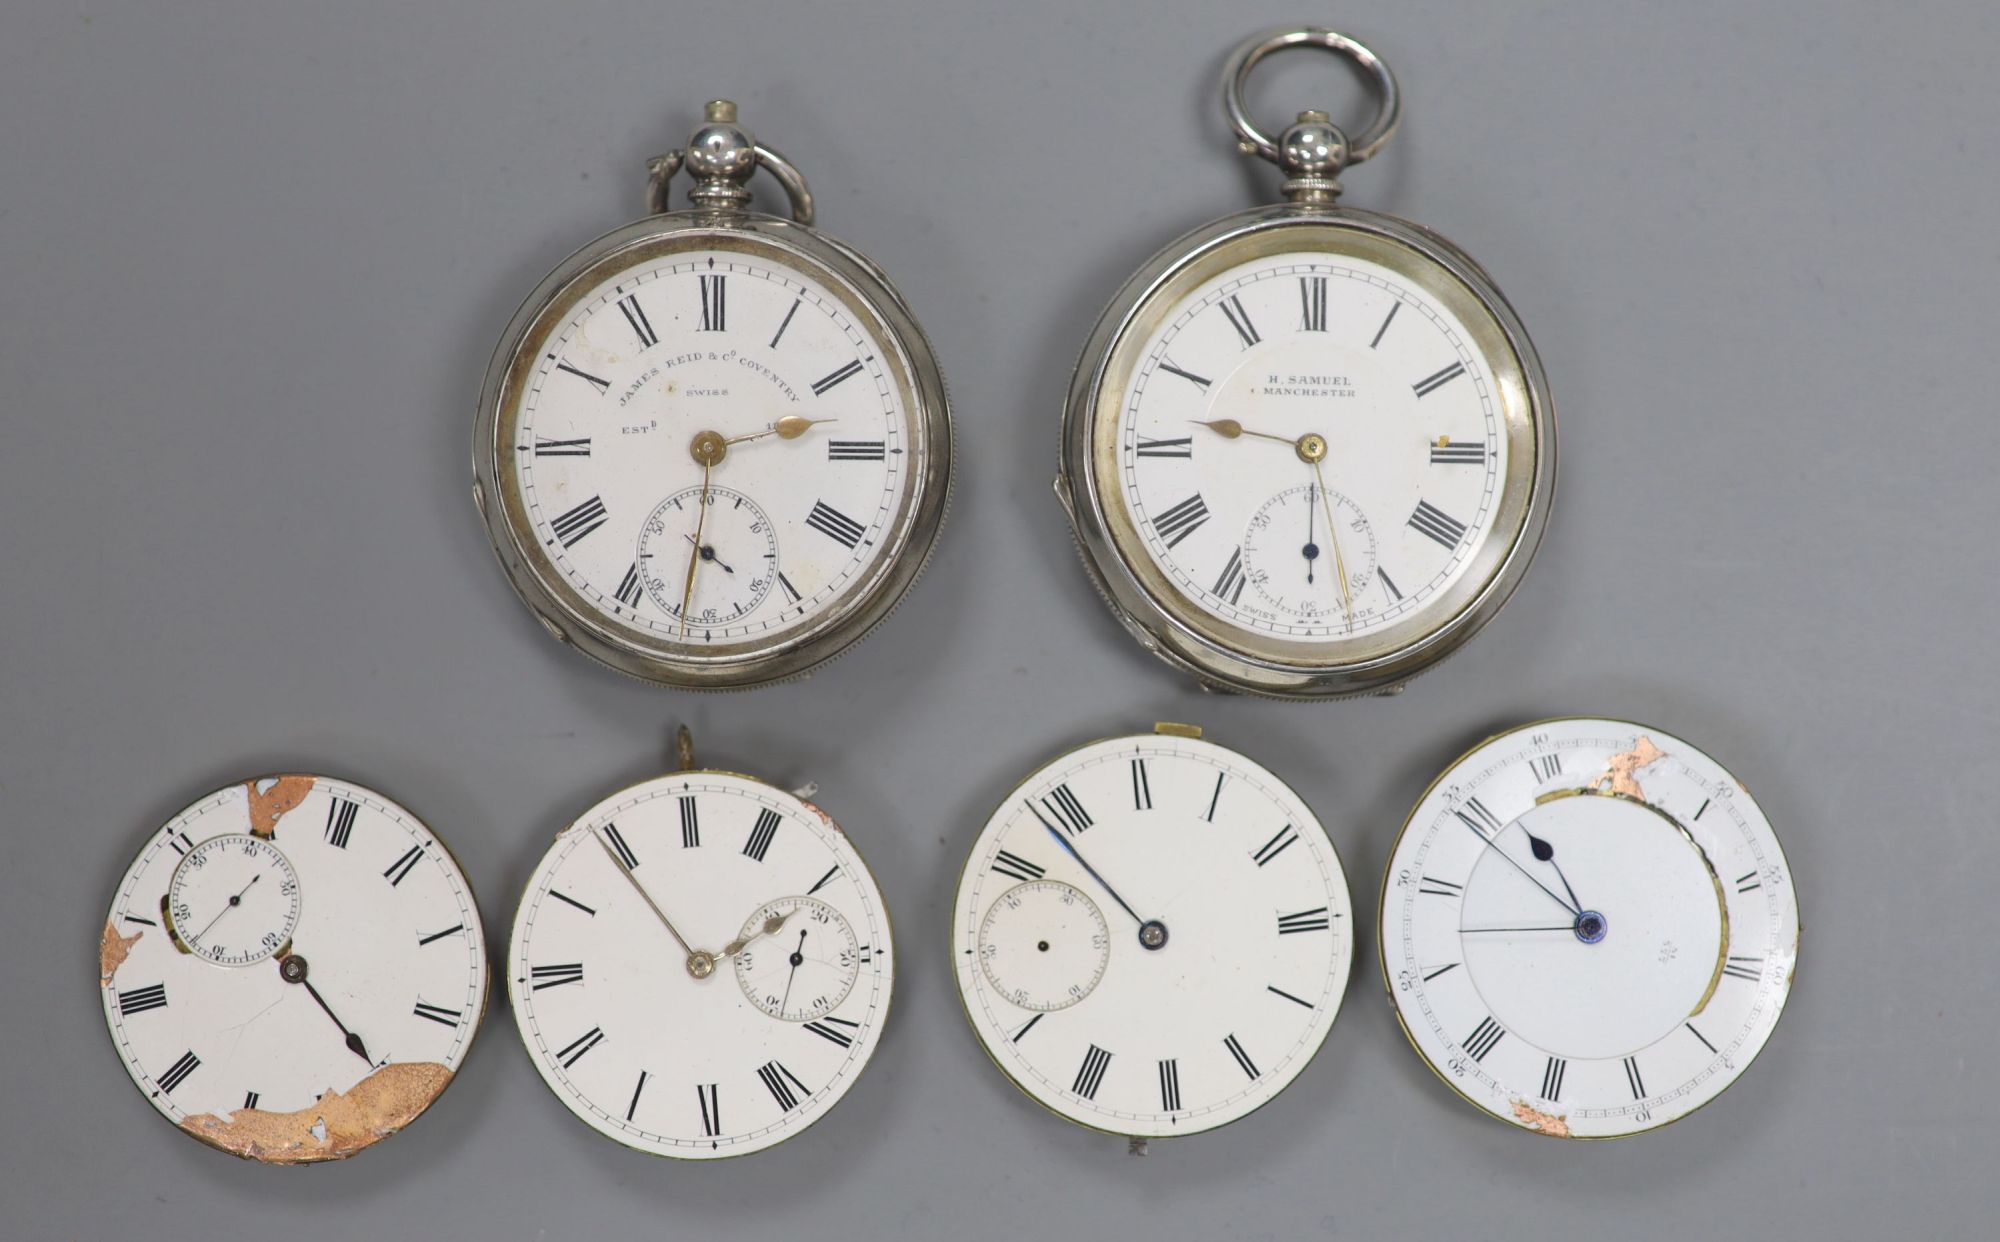 Two early 20th century silver or white metal pocket watches and four assorted pocket watch movements.